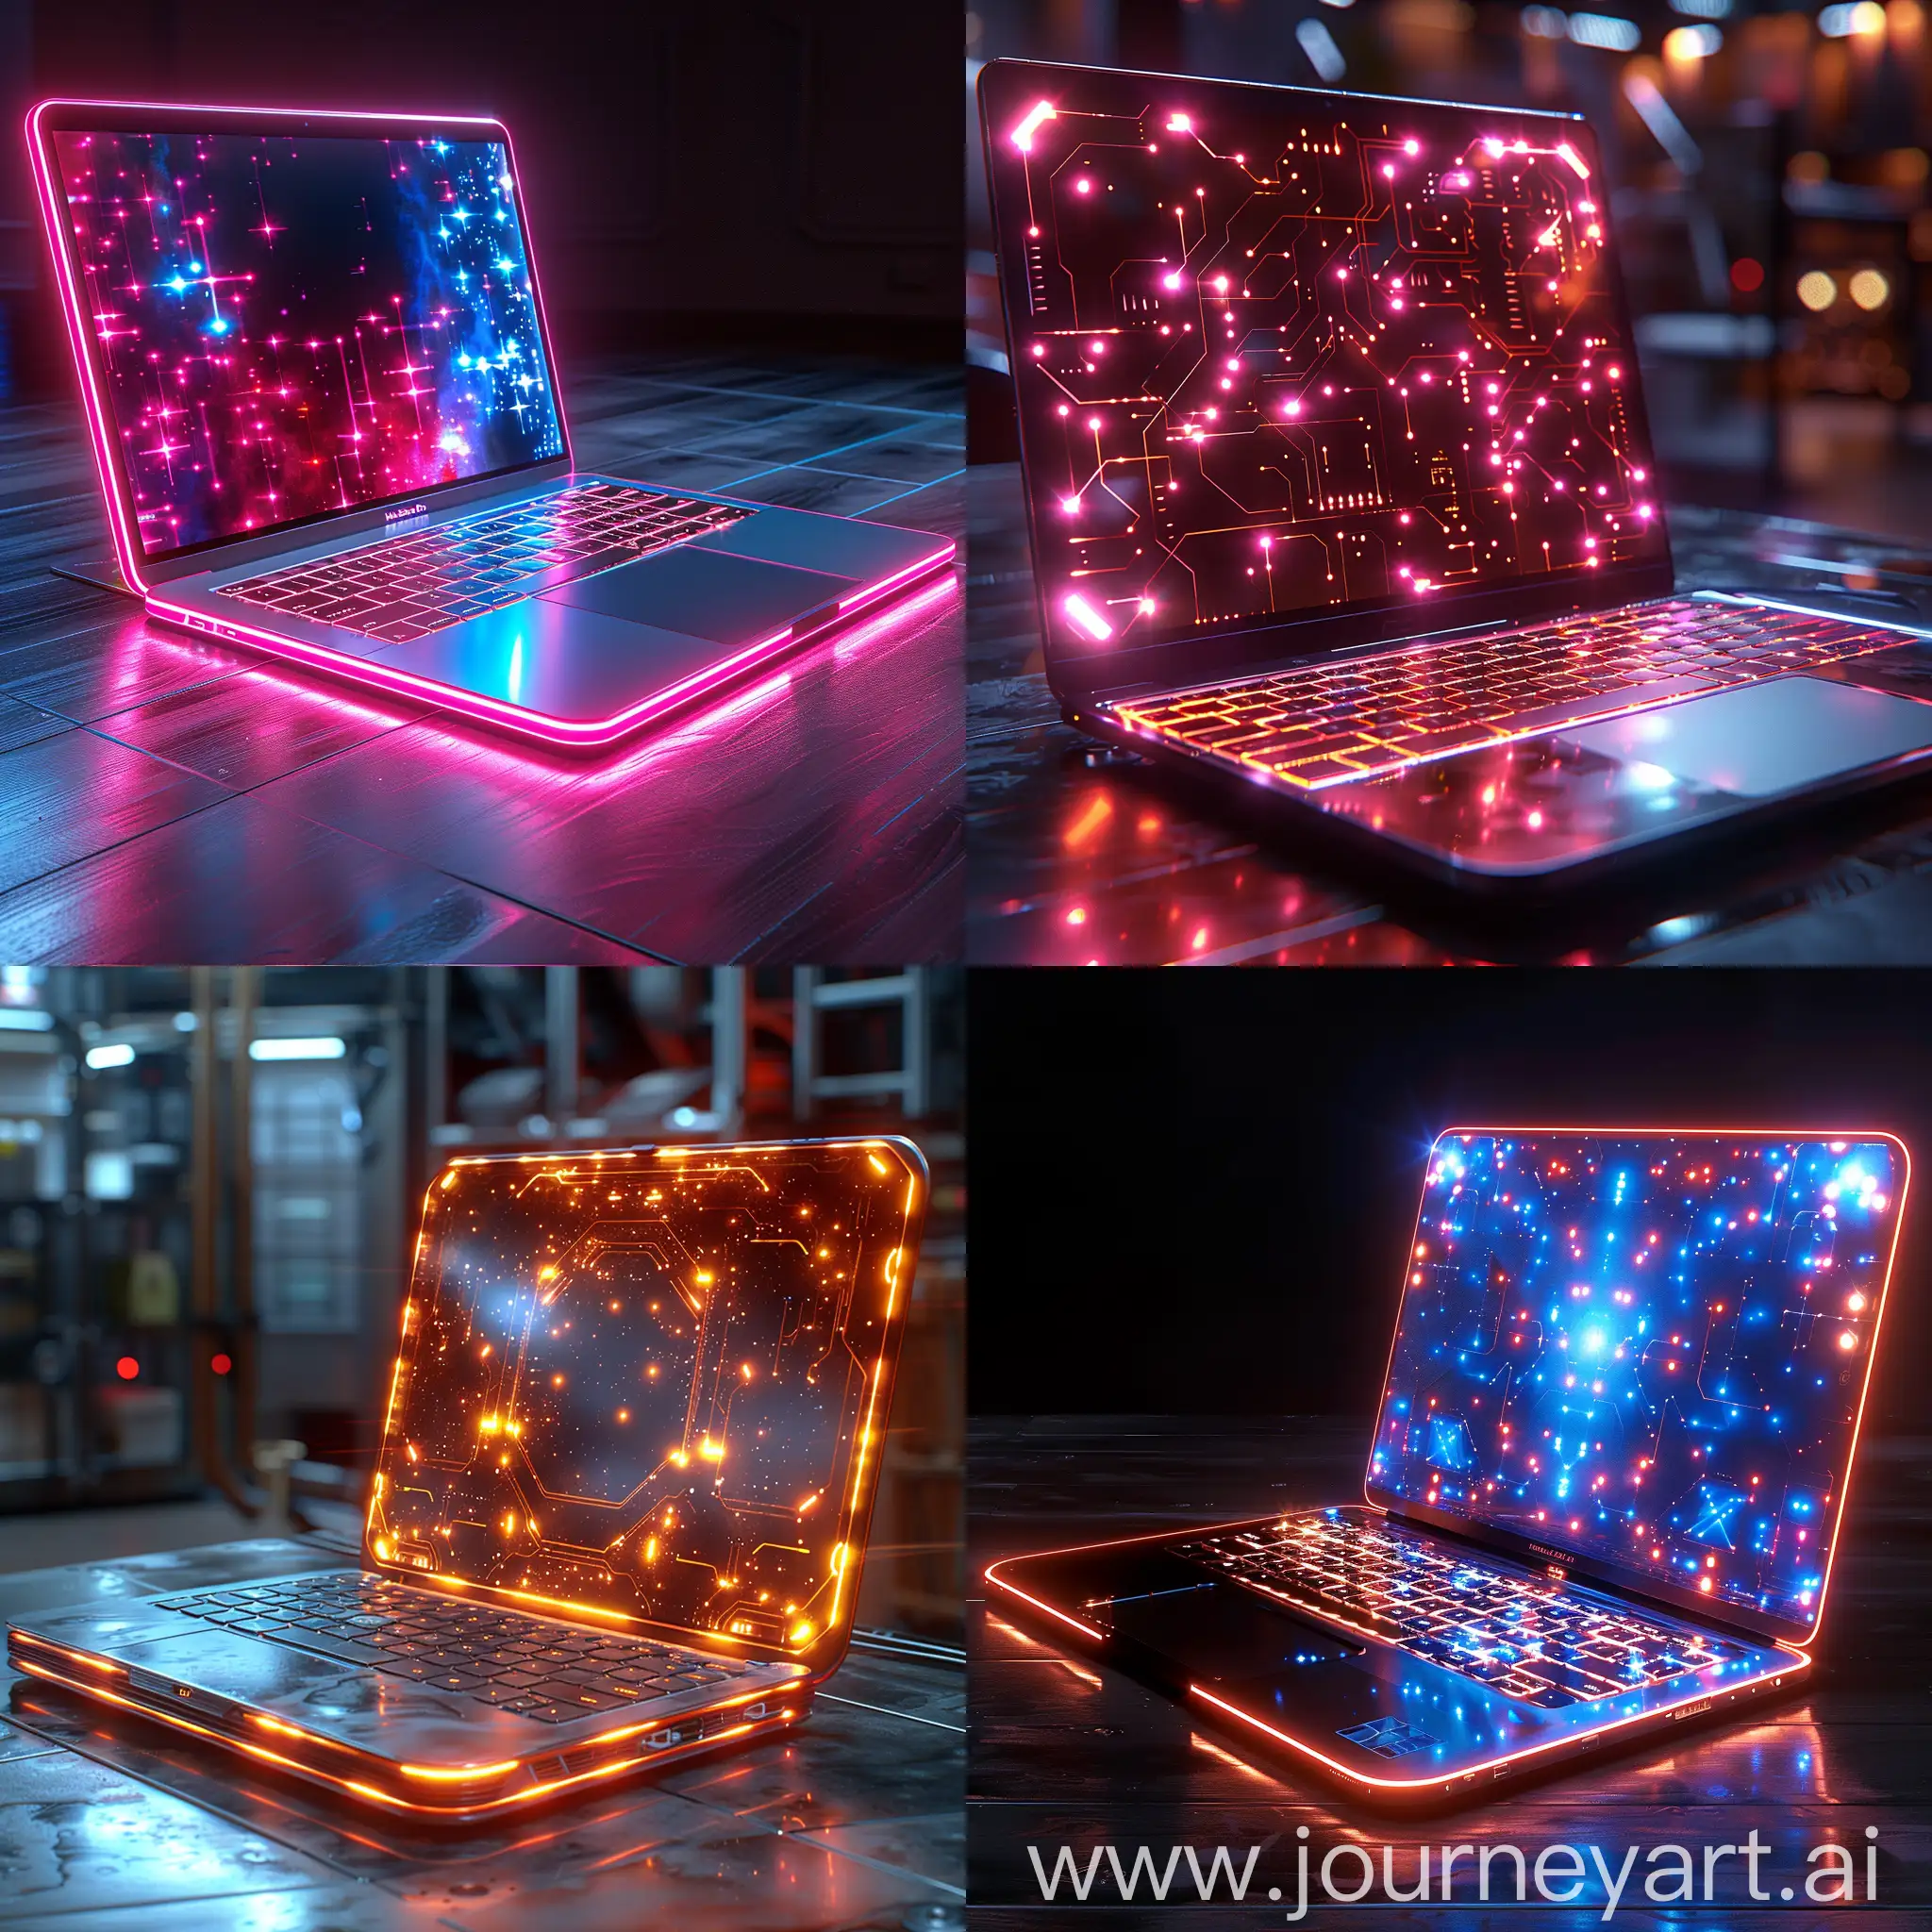 Futuristic-Laptop-with-Organic-LED-Technology-HighTech-Style-Rendering